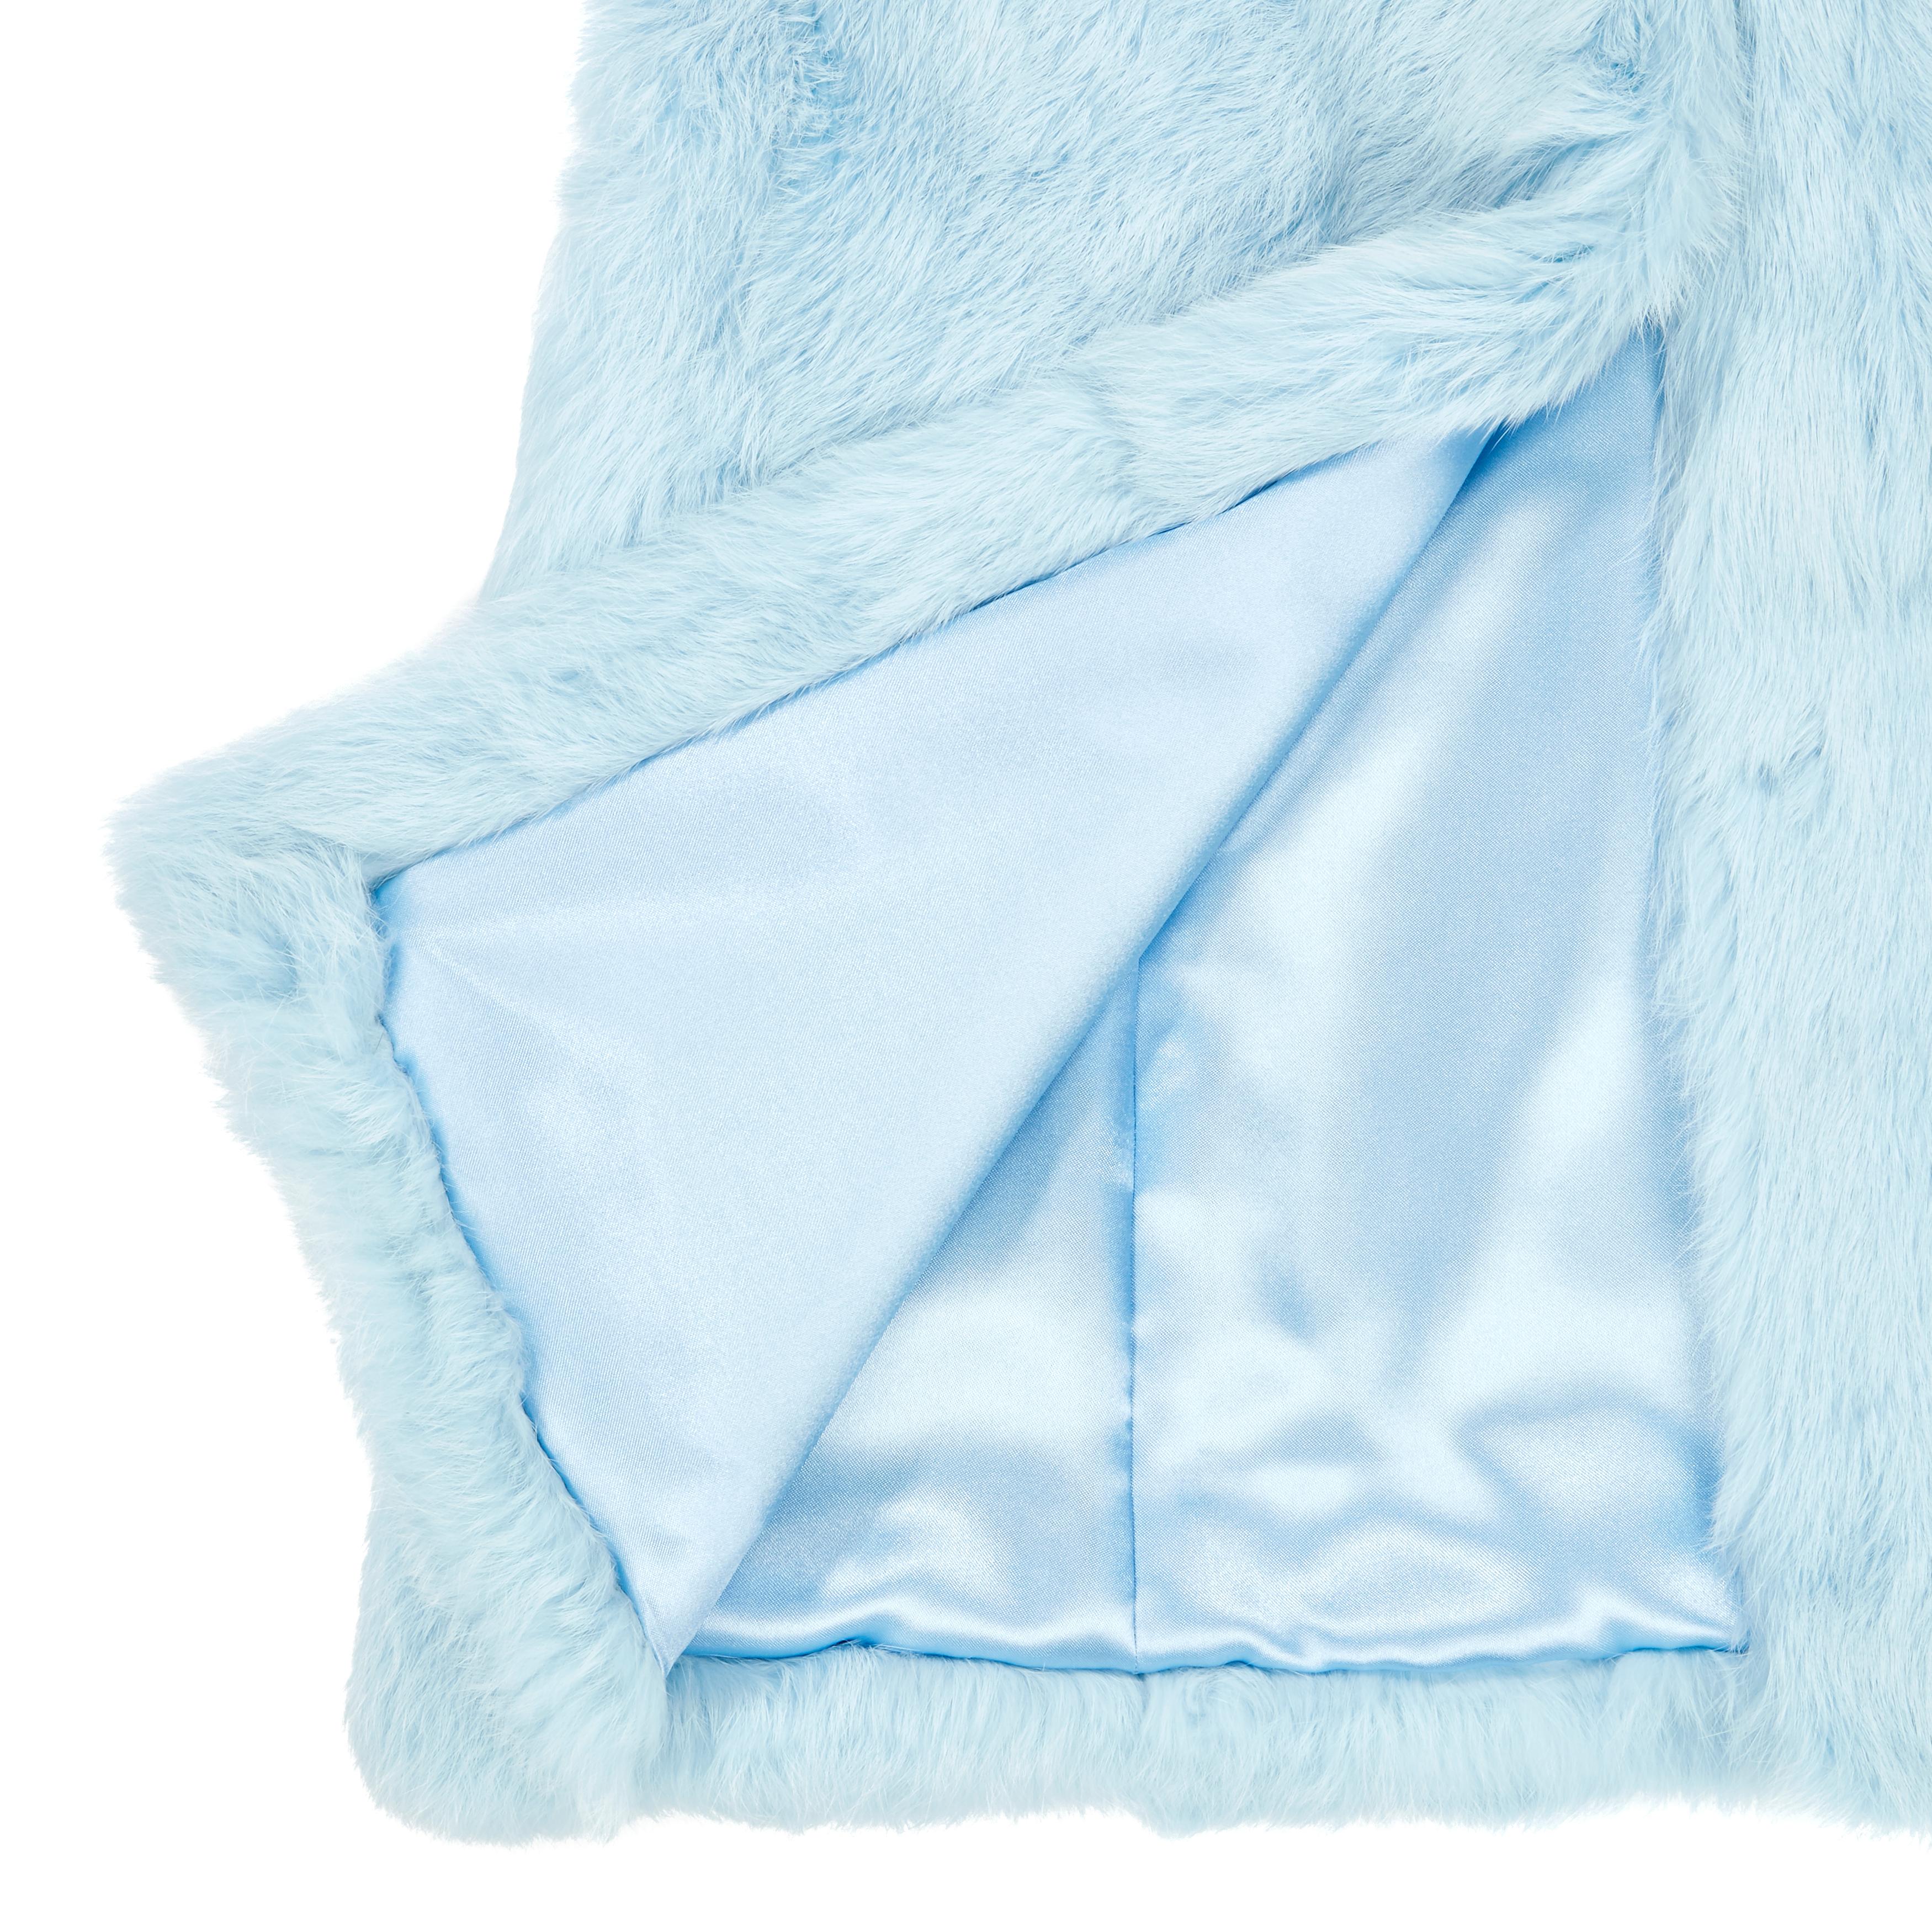 Verheyen London Nehru Gilet in Rabbit Fur in Iced Blue Topaz - Size UK 8-12

PRODUCT DETAILS - Brand New 
The Nehru gilet is Verheyen London’s casual design. The tailored statement gilet is perfect with a pair or jeans, and or over a jumper in the